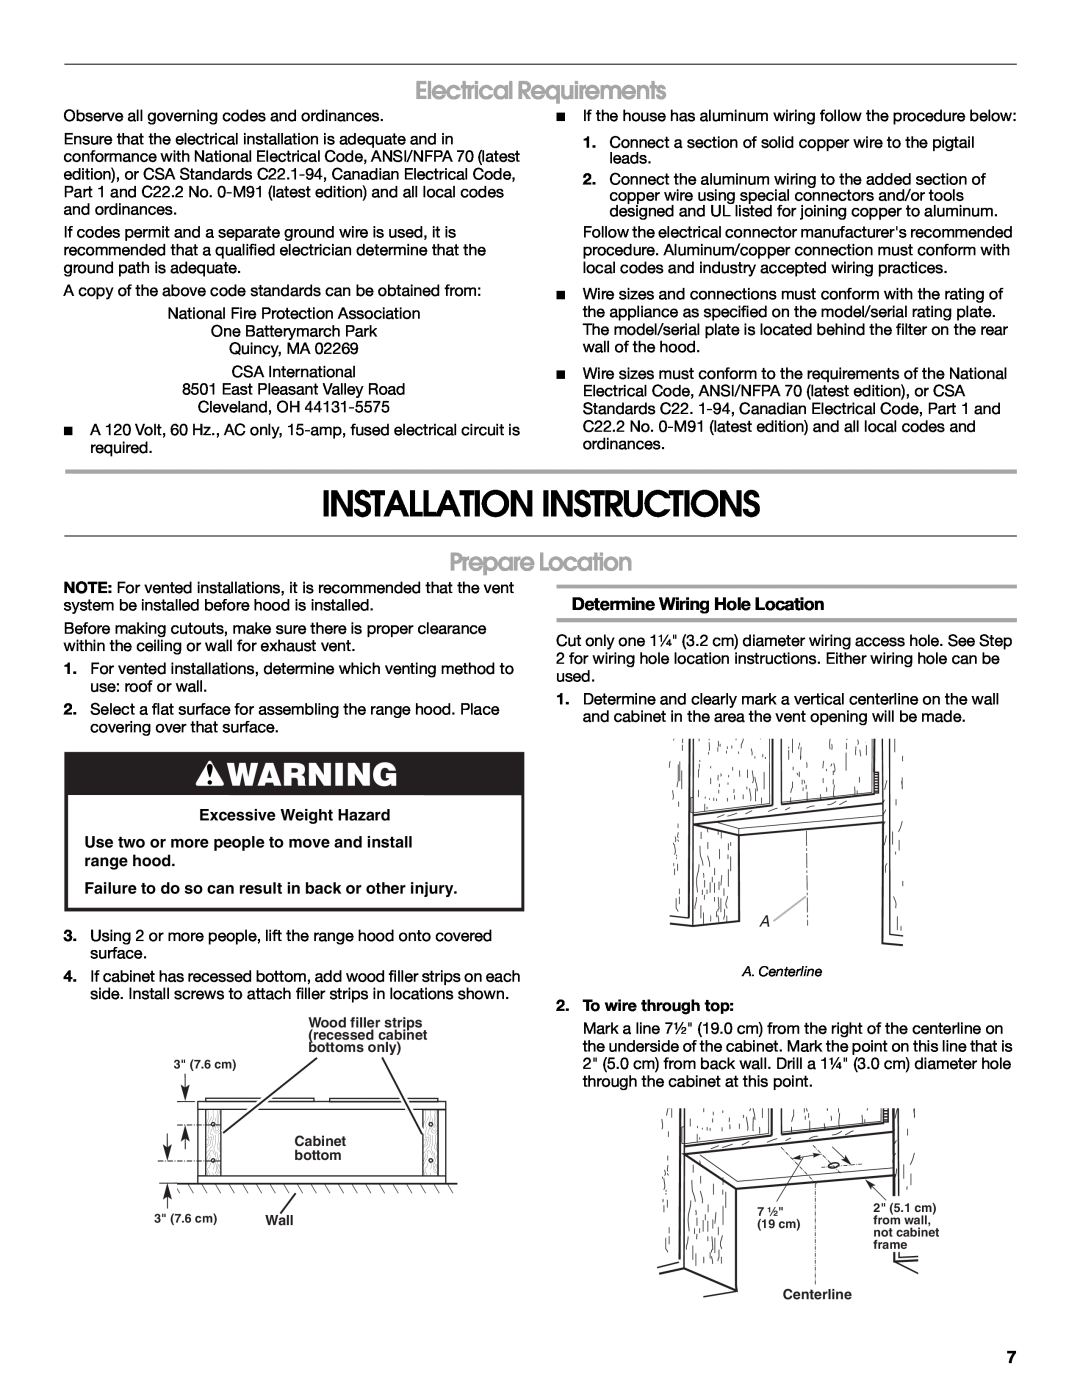 Whirlpool 99044505A Installation Instructions, Electrical Requirements, Prepare Location, Determine Wiring Hole Location 